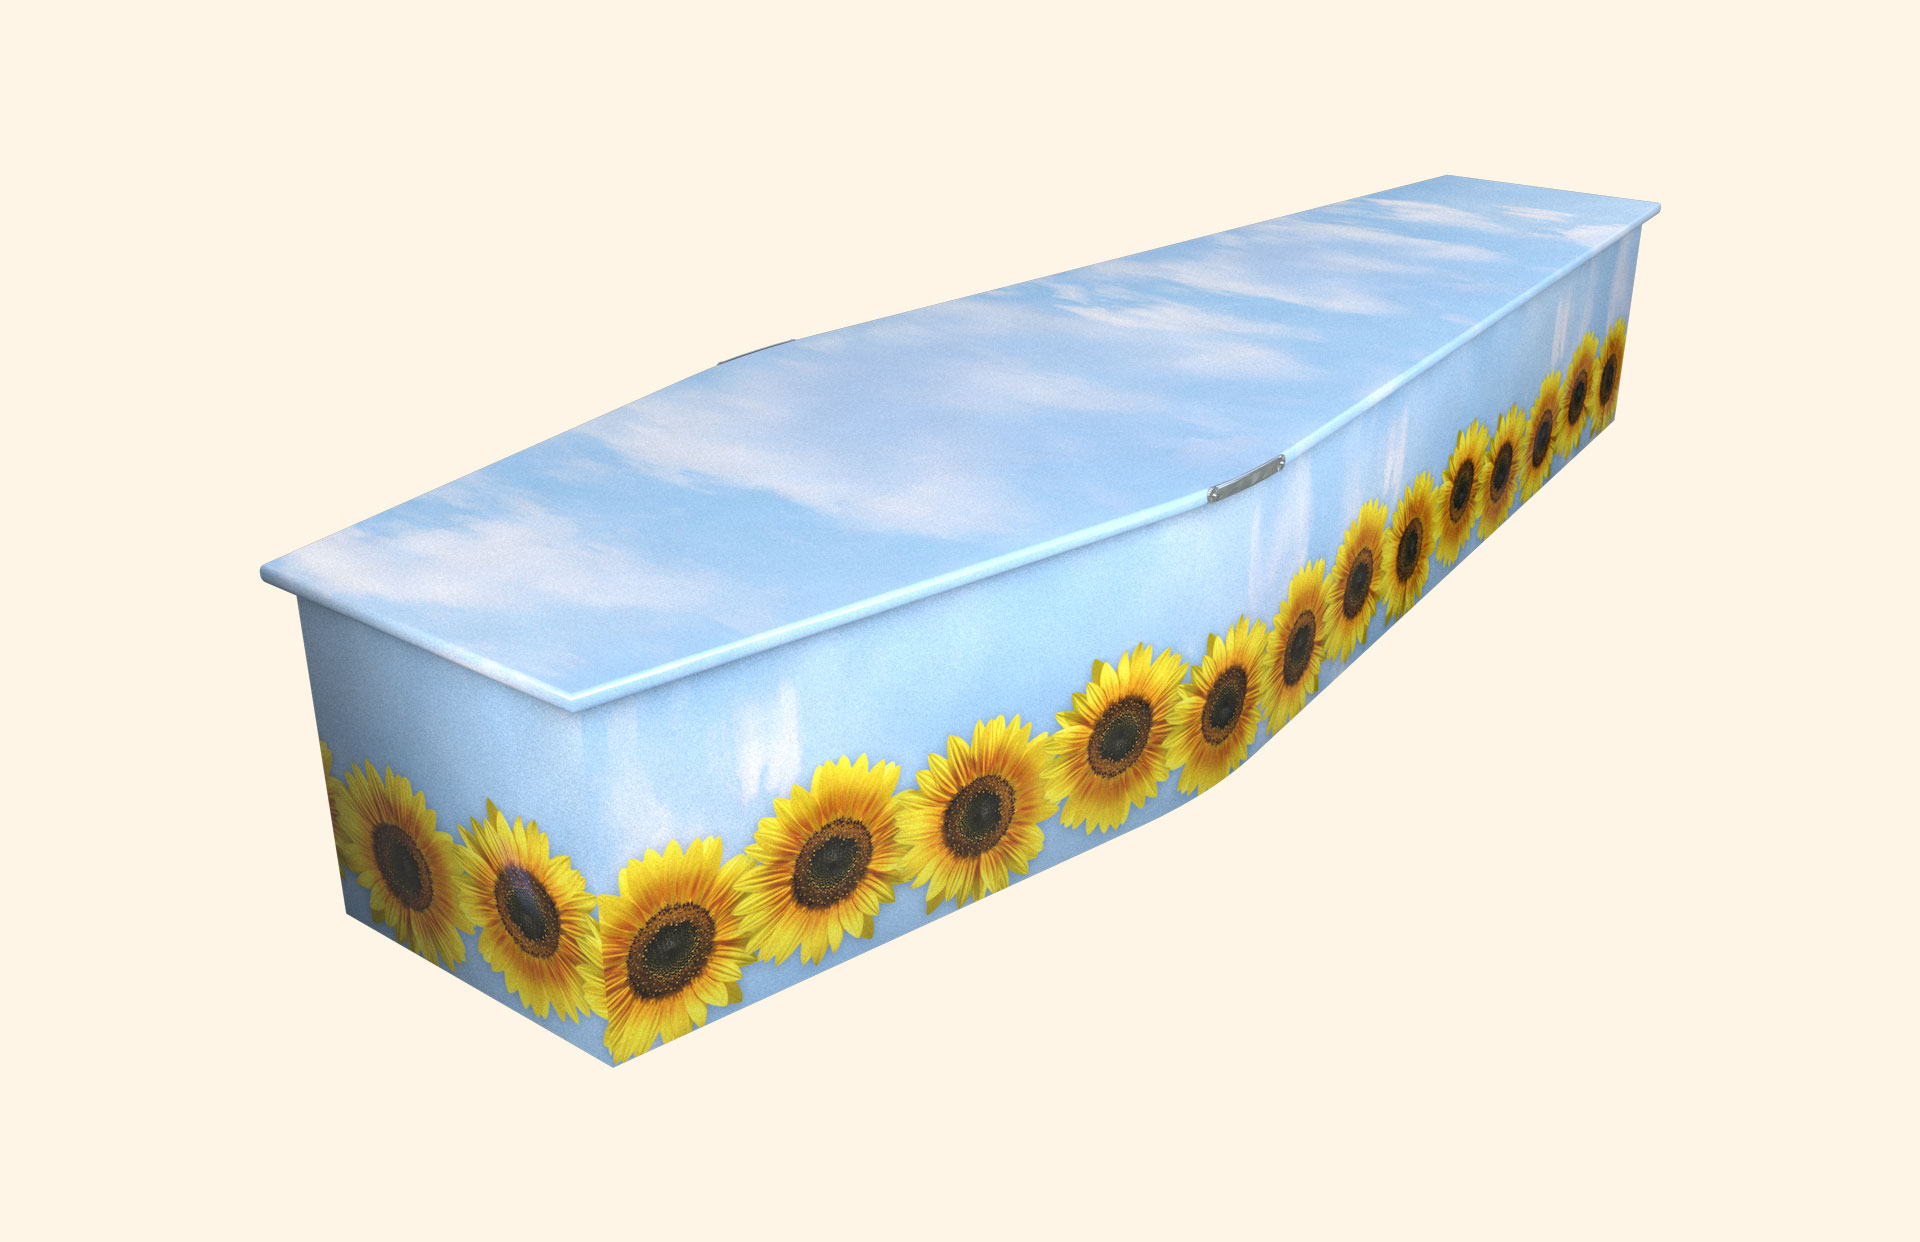 Sunflower Sky design on a traditional coffin